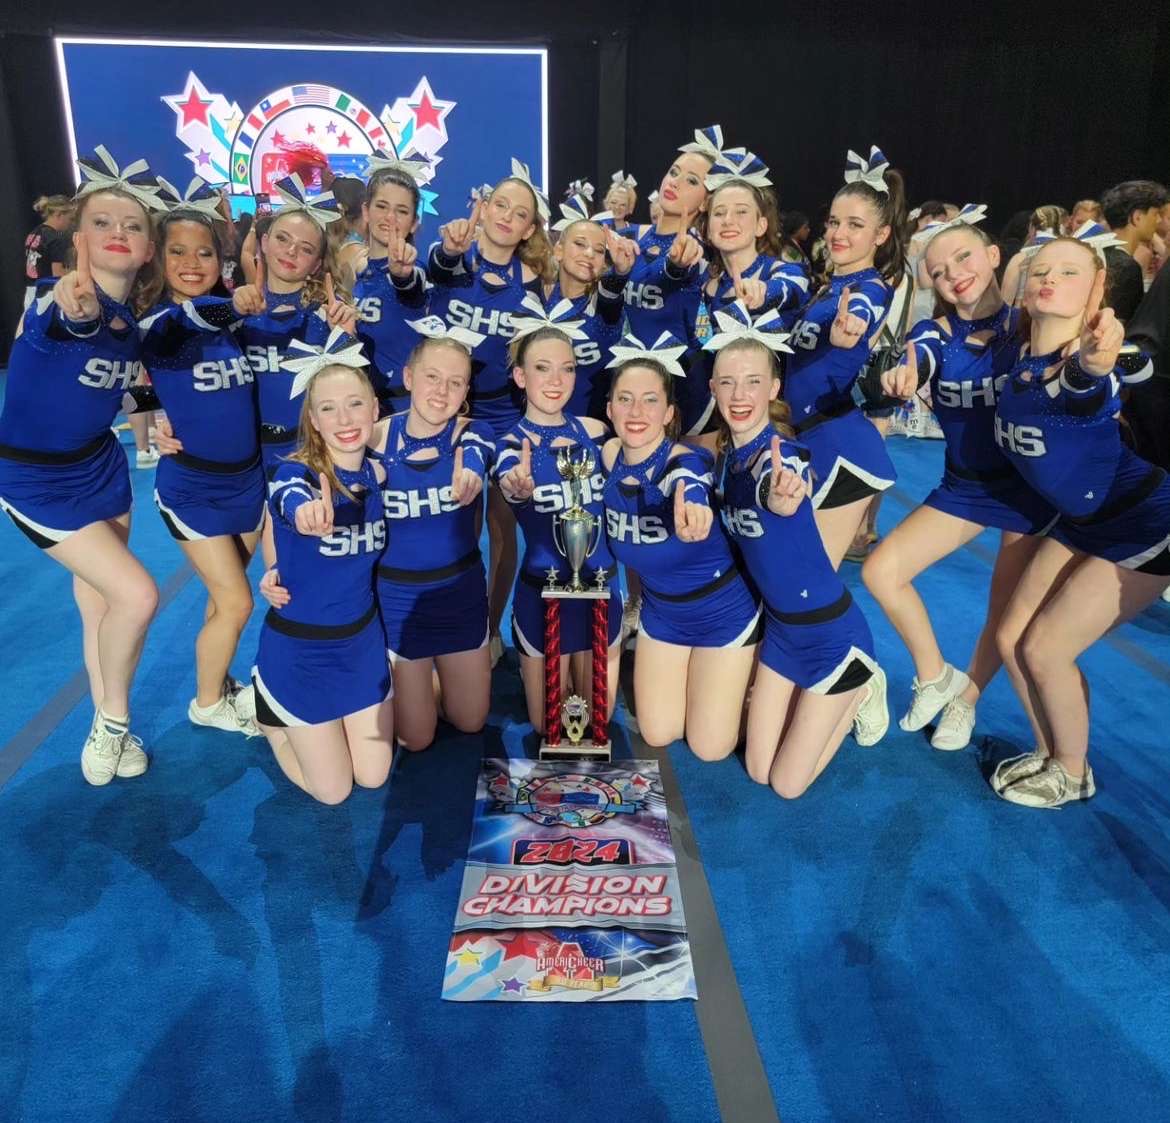 The+SHS+Cheer+Team+won+gold+at+a+national+competition+in+Orlando%2C+Florida